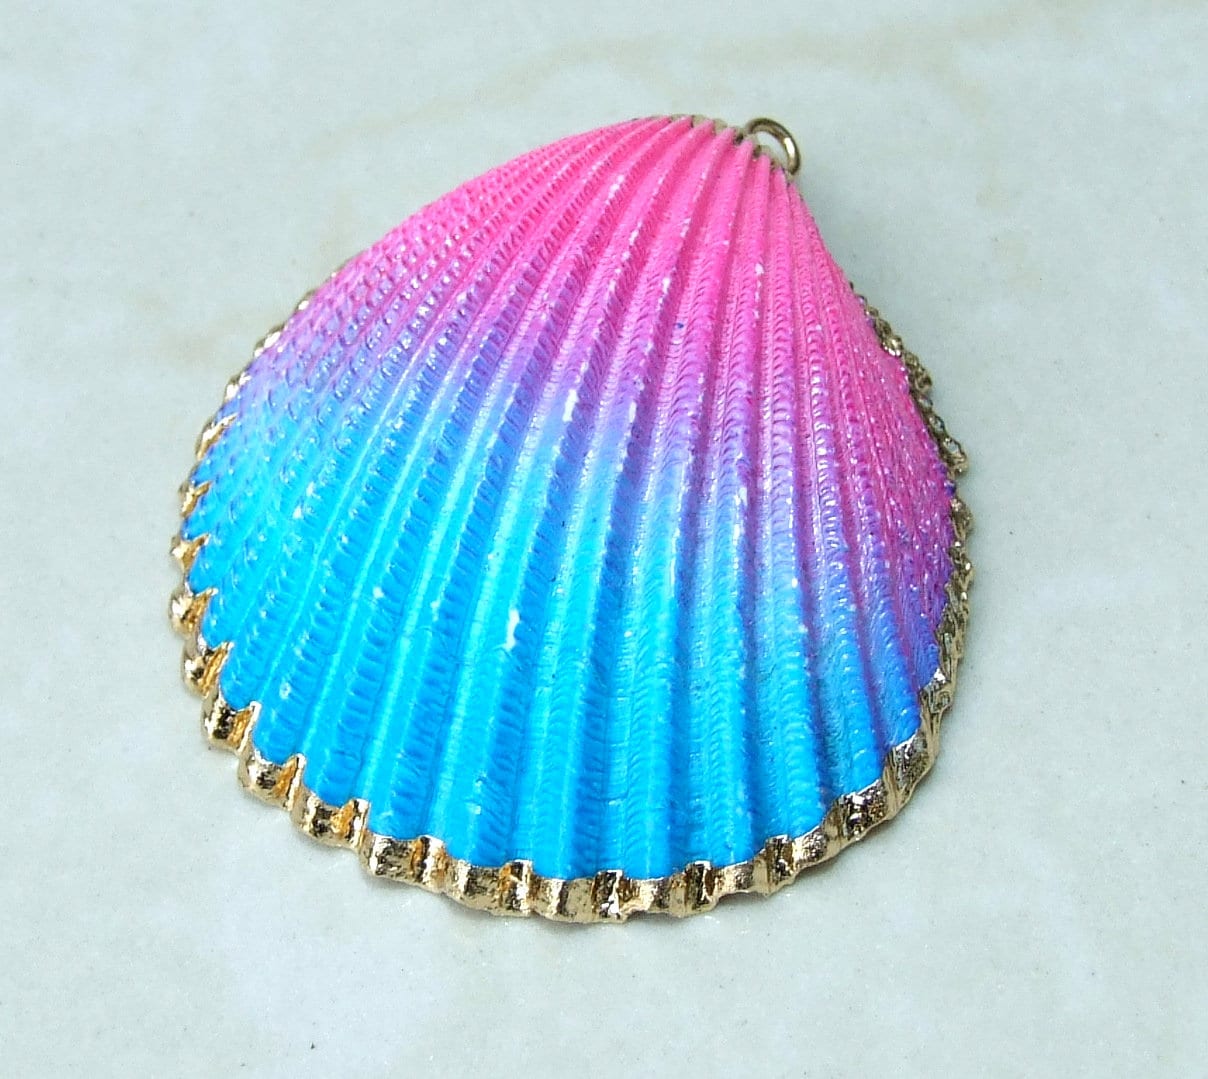 Hand Painted Natural Sea Shell Pendant, Seashell Bead, Shell Pendant, Charm, Clam Shell, Shell Jewelry, Pink and Blue - 35-40mm - 04A